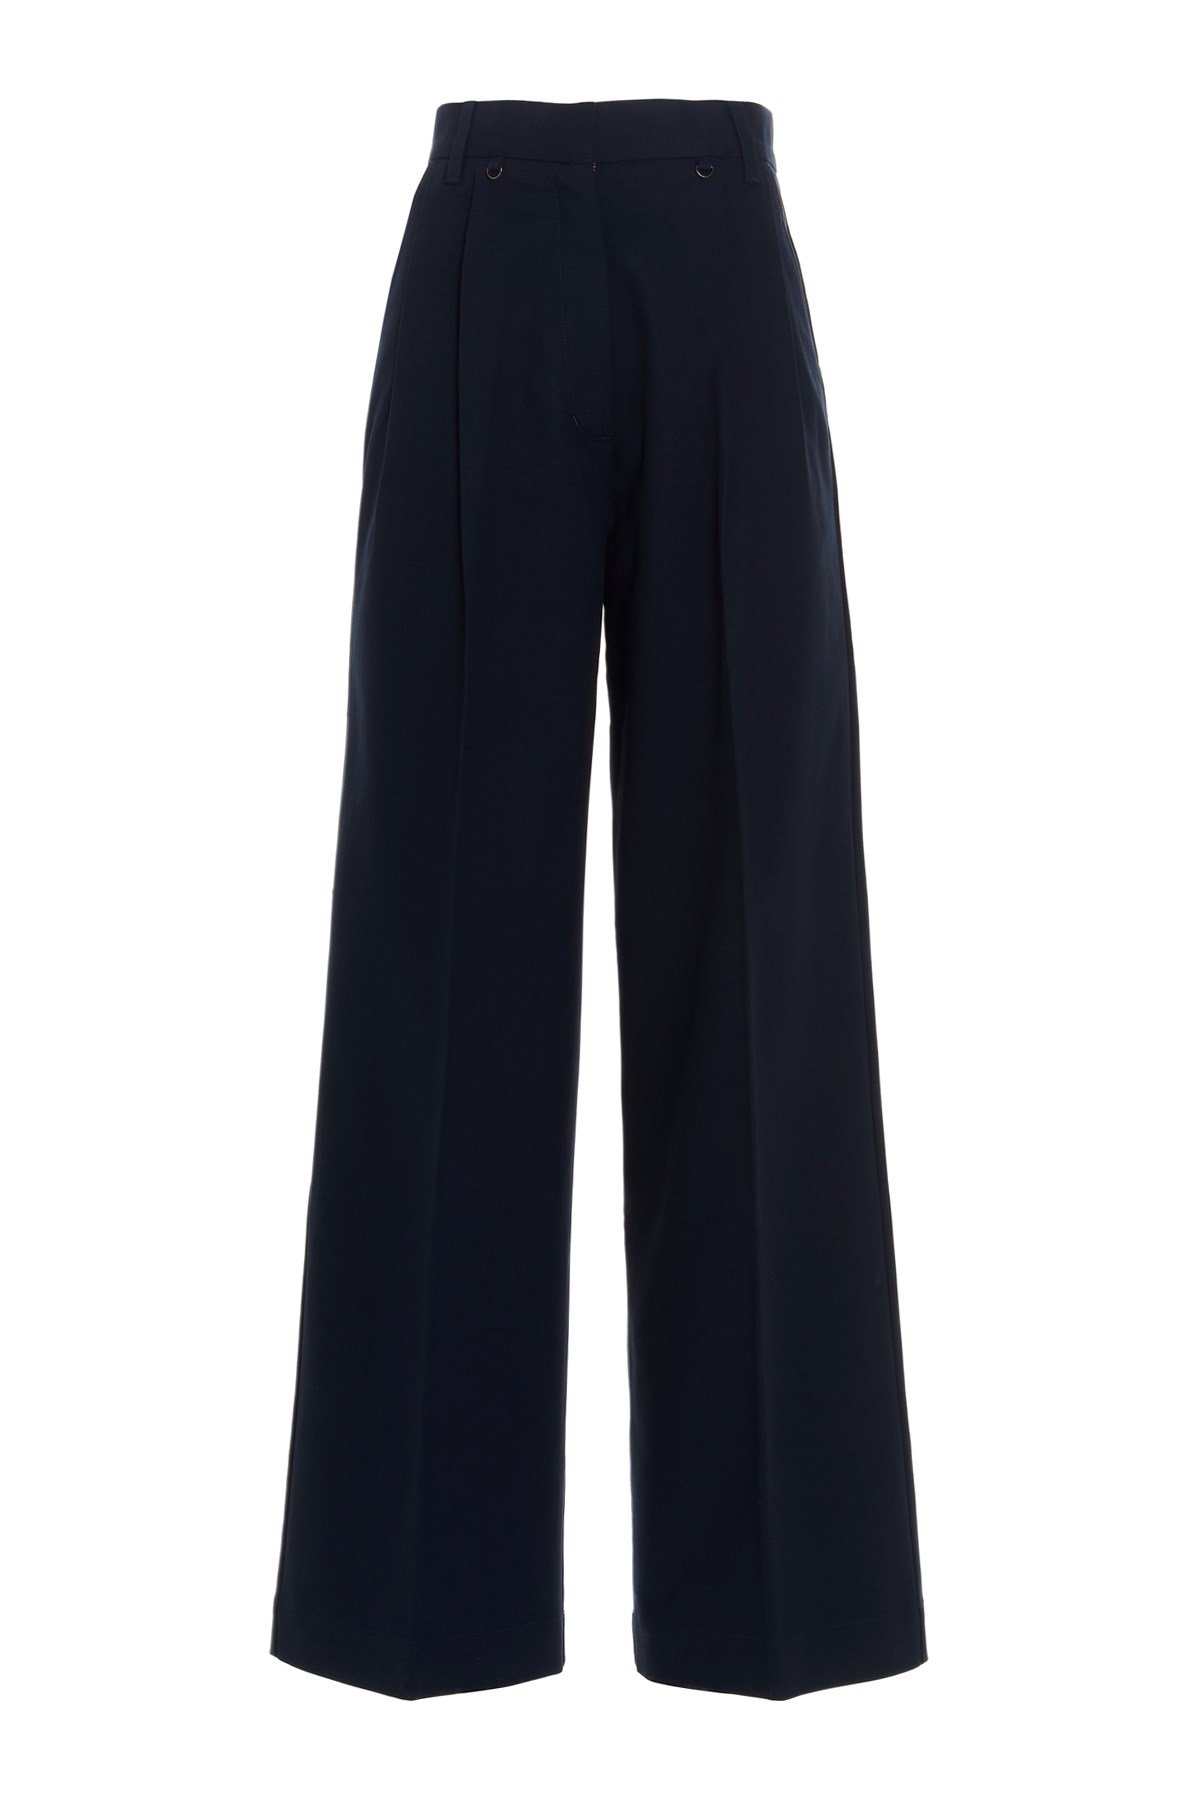 DHRUV KAPOOR Palazzo Trousers